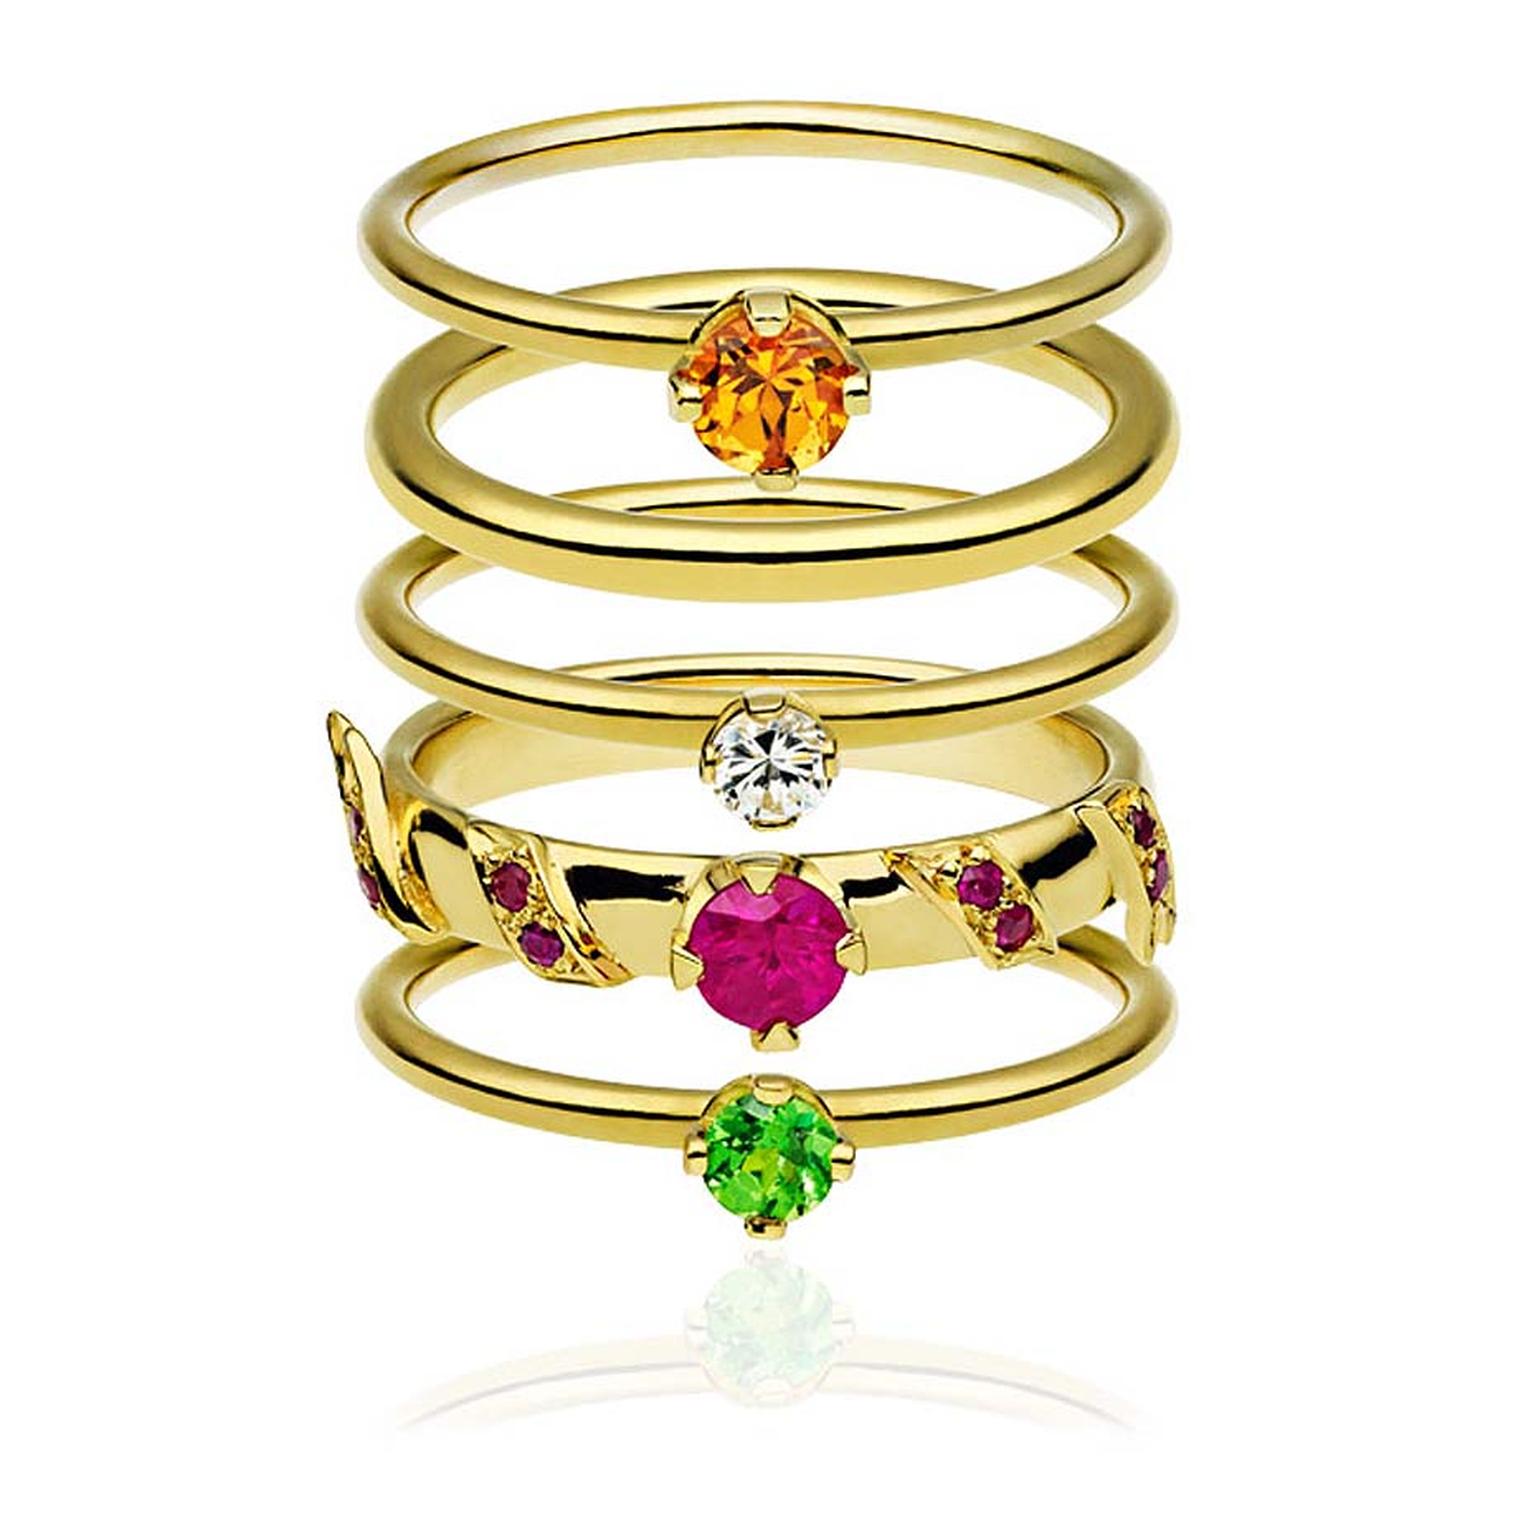 Ana de Costa Alchemy gemstone stacking rings in yellow gold featuring a round brilliant-cut mandarin garnet, a brilliant-cut diamond, brilliant-cut rubies and a brilliant-cut tsavorite,£2,950.